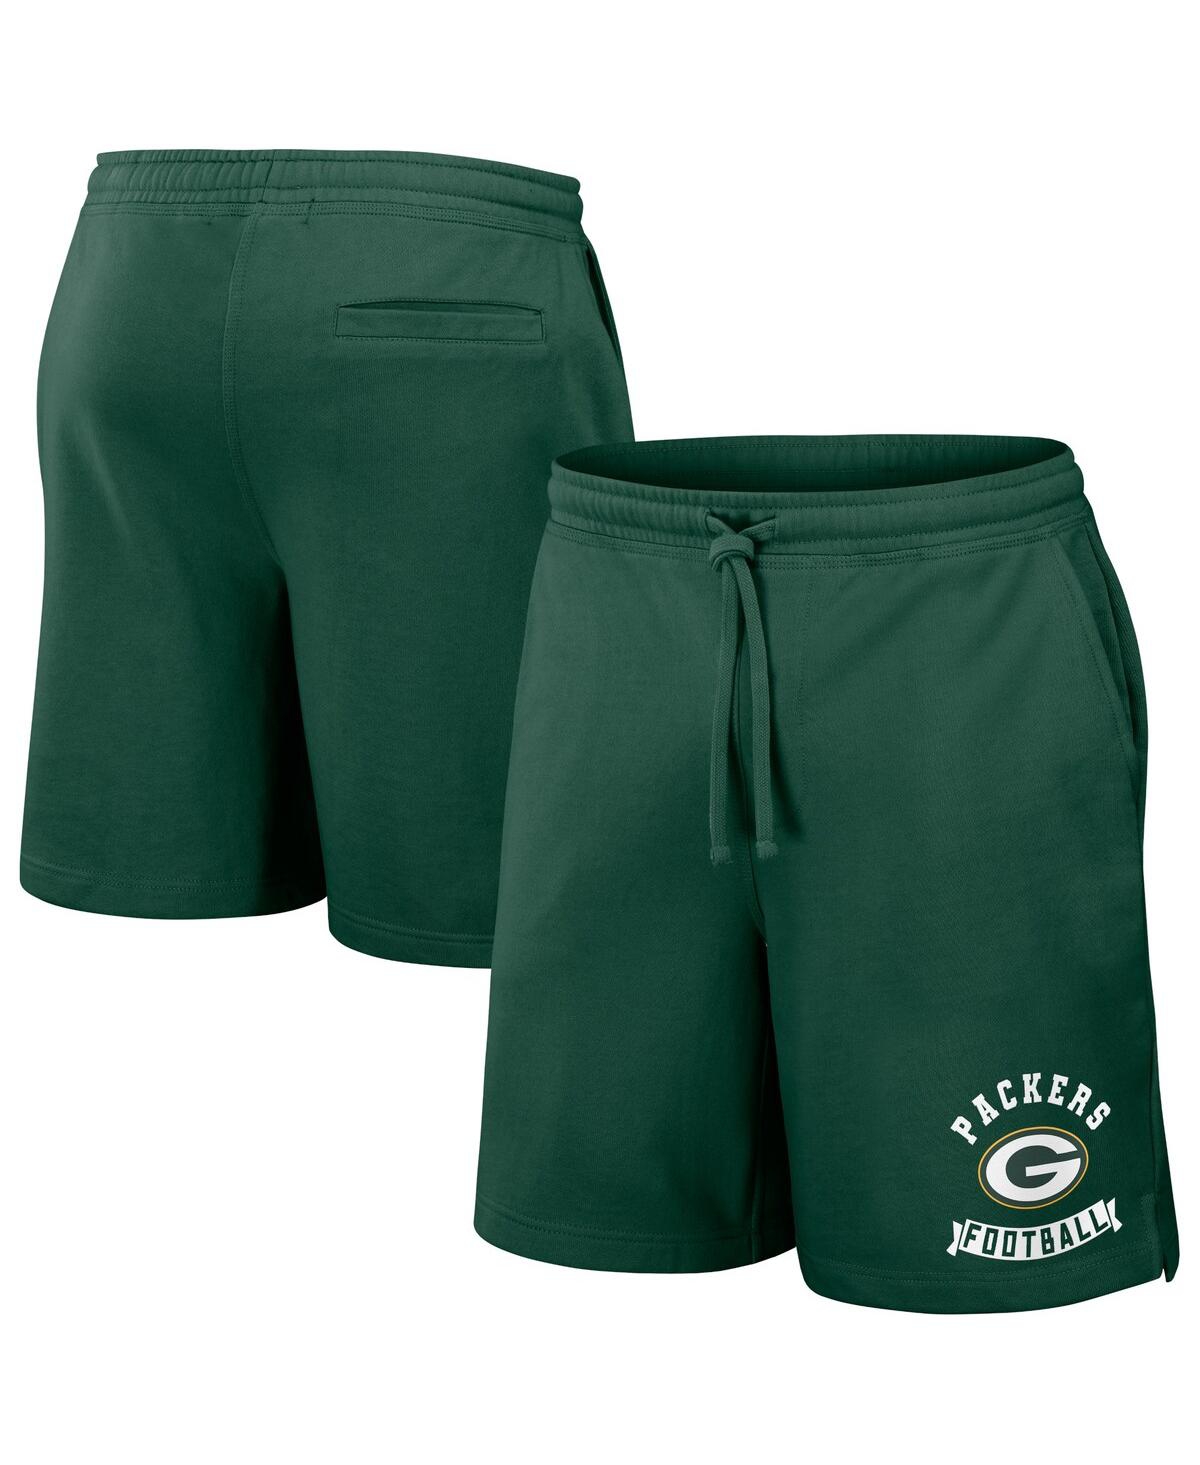 Fanatics Men's Nfl X Darius Rucker Collection By  Green Green Bay Packers Washed Shorts